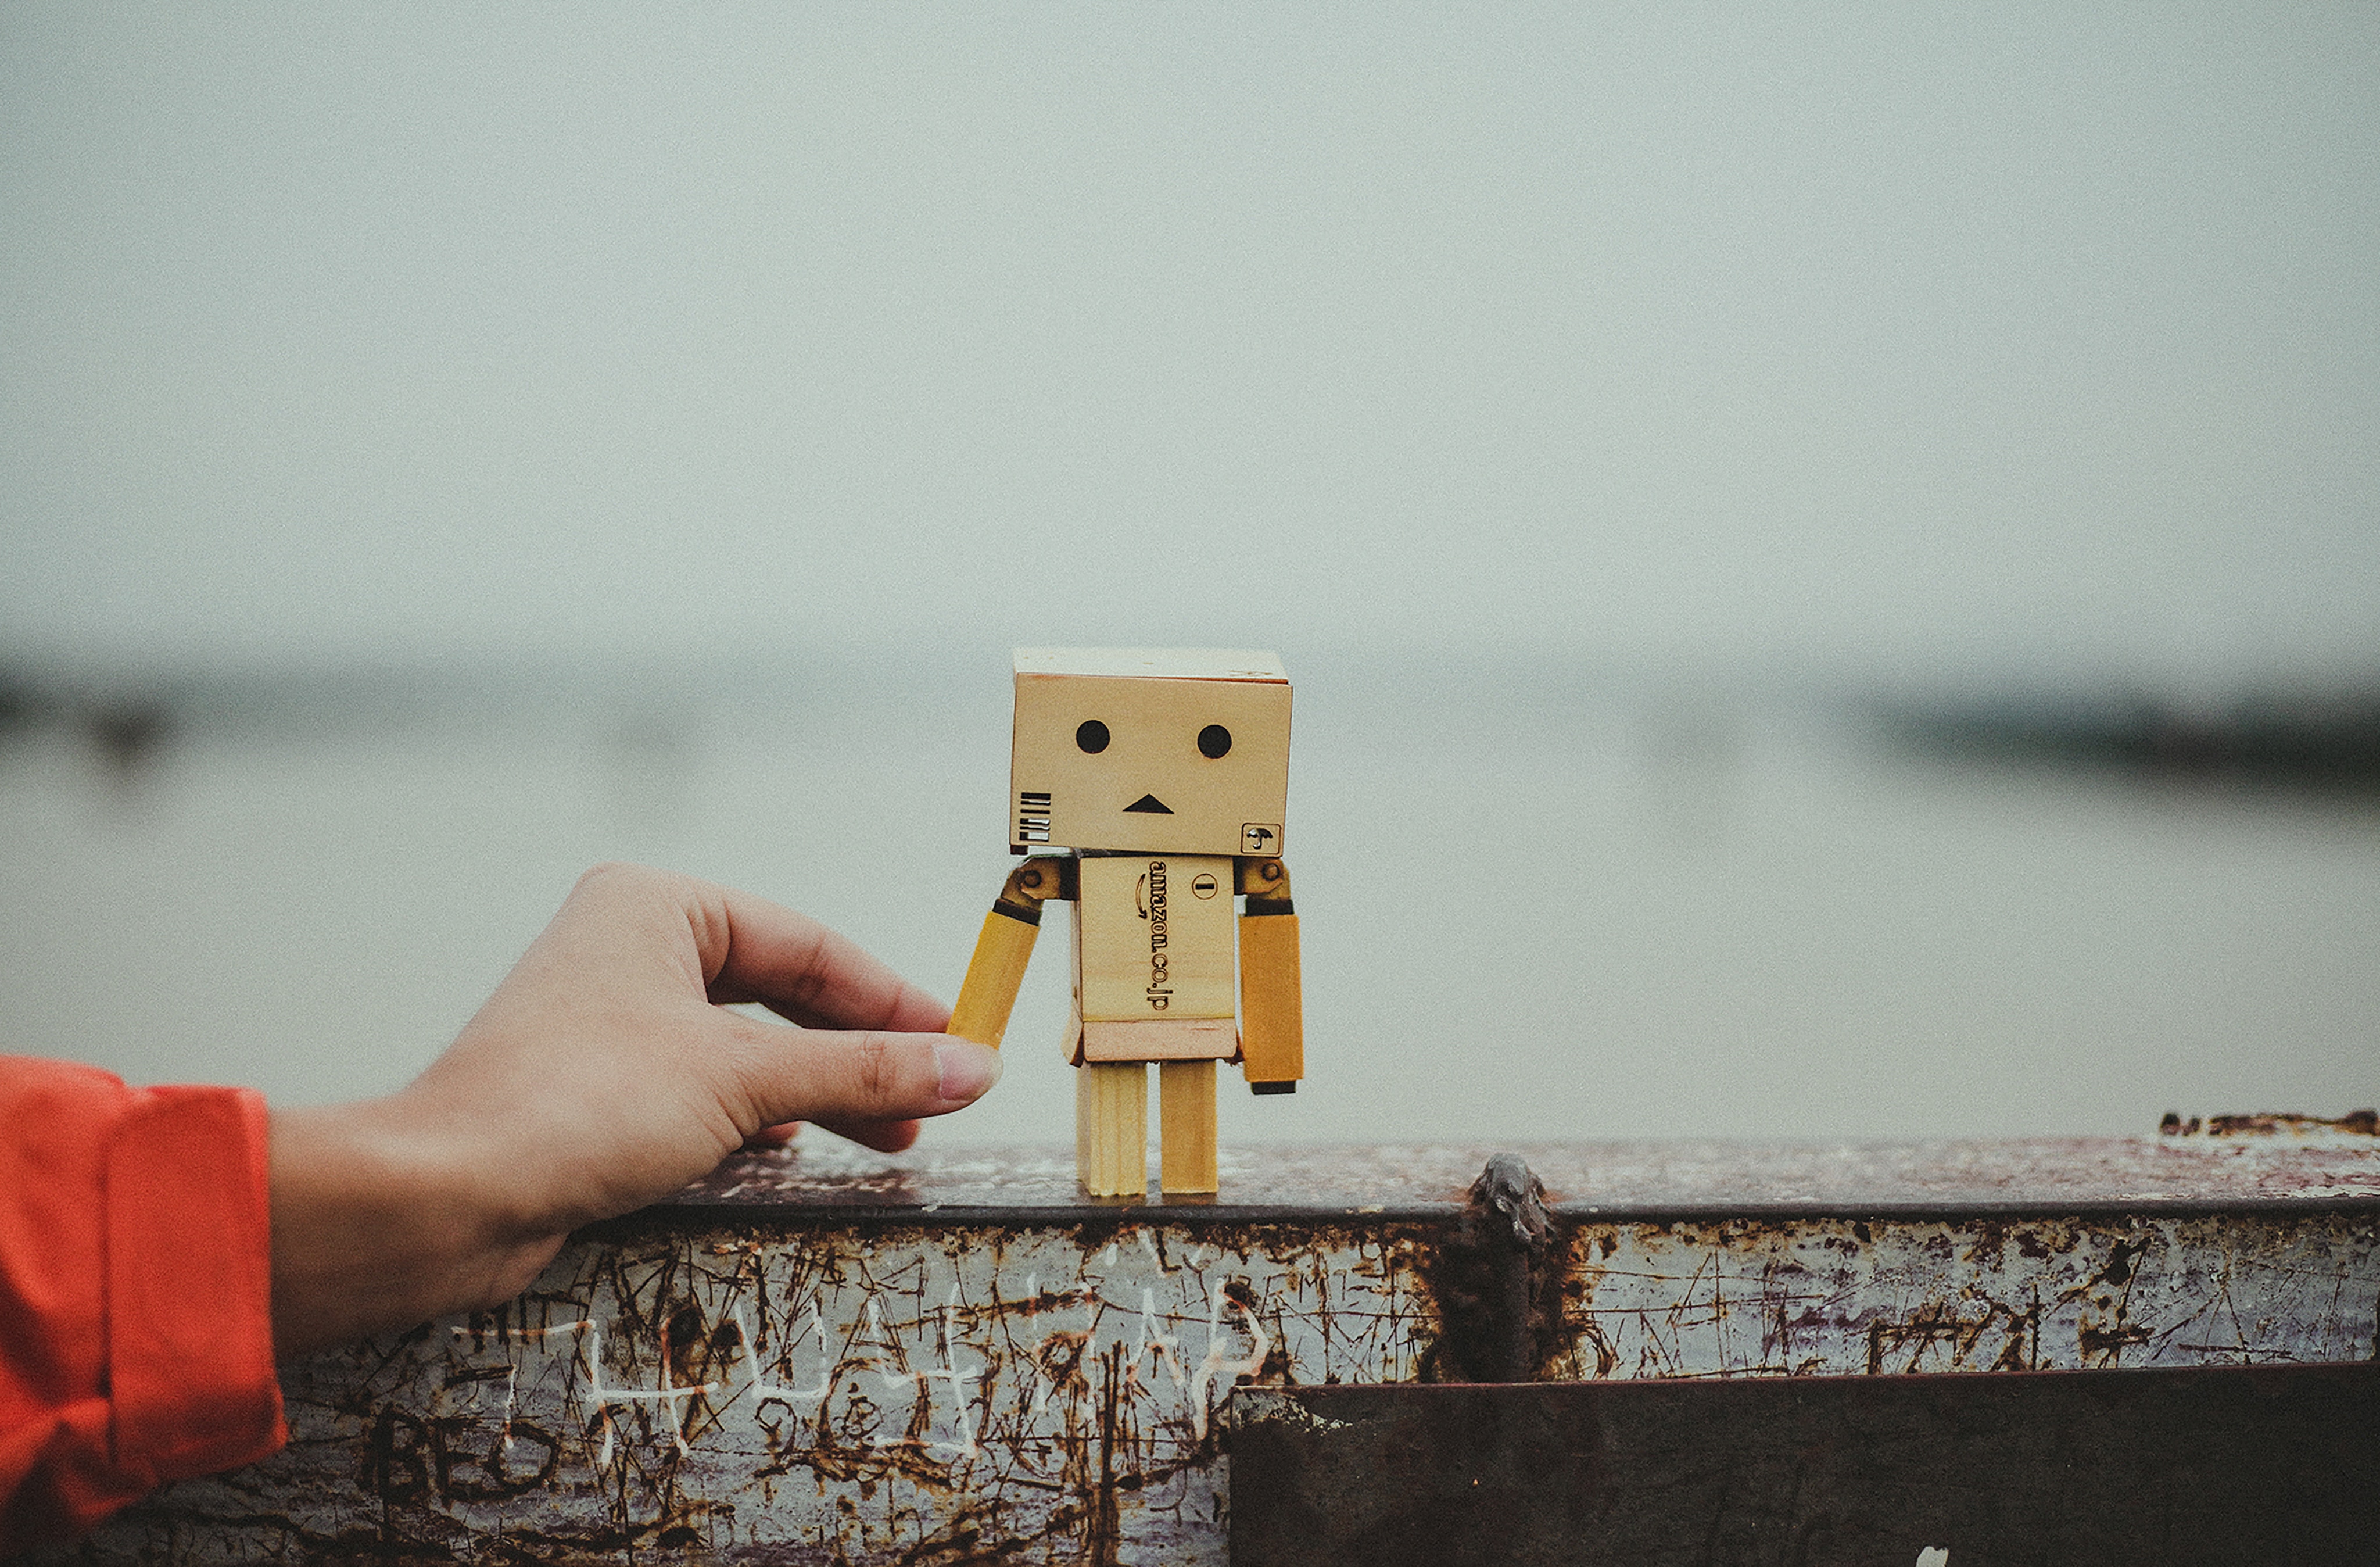 57243 download wallpaper friendship, hand, miscellanea, miscellaneous, danbo, cardboard robot screensavers and pictures for free